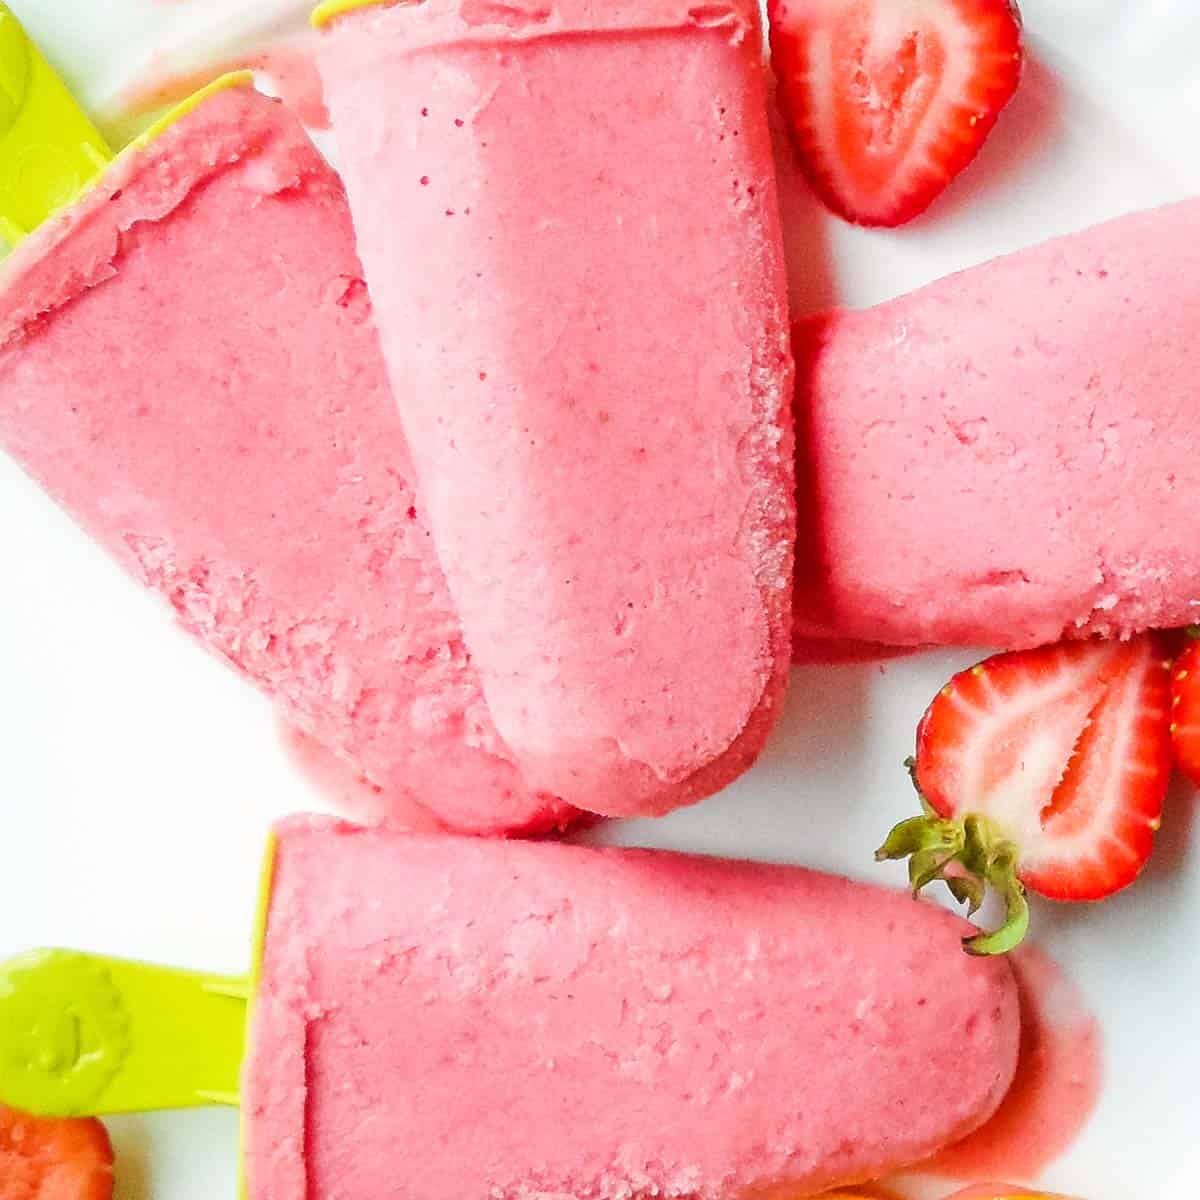 strawberries and cream popsicles